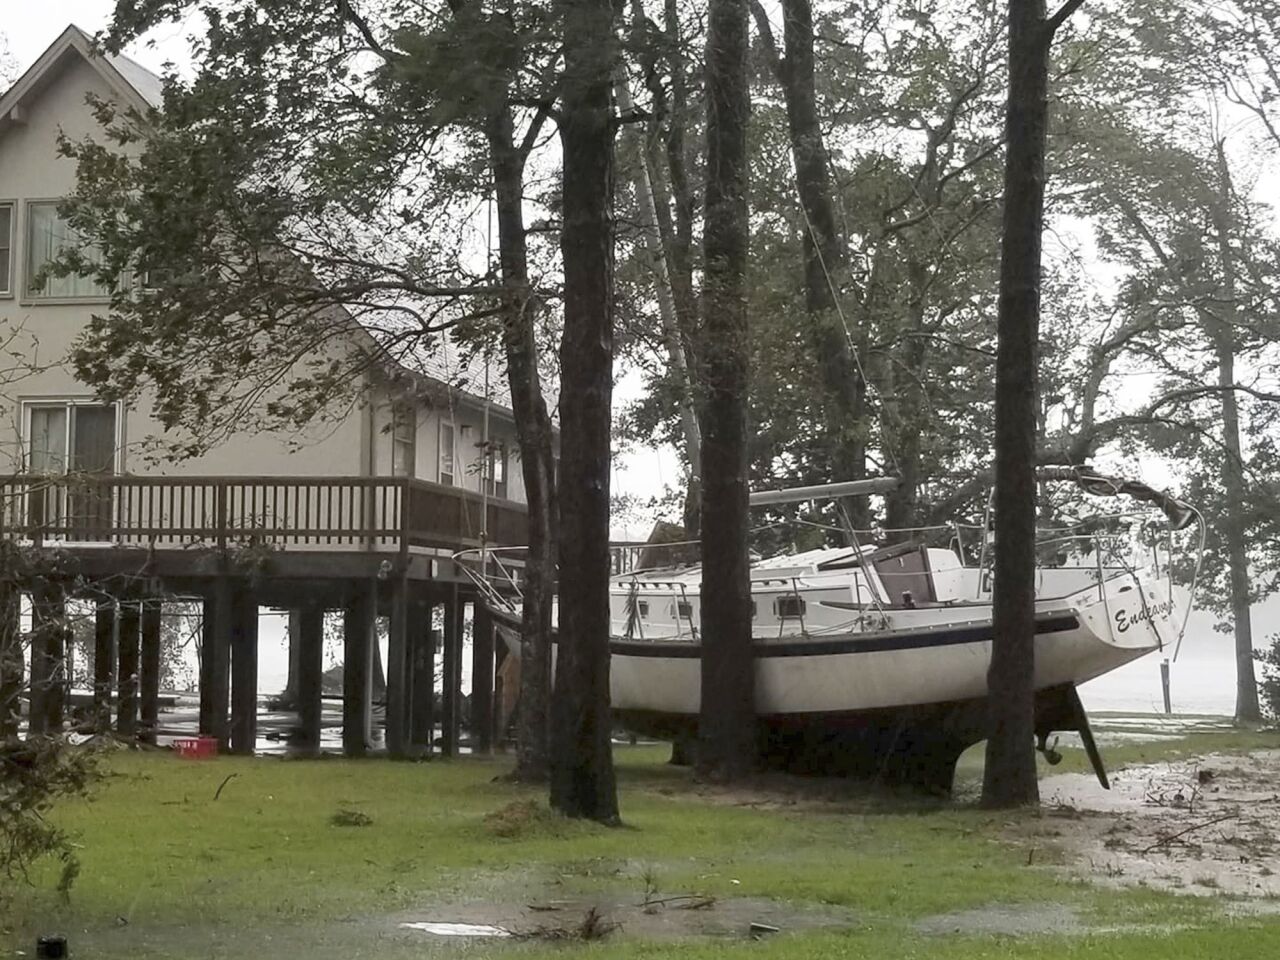 A boat is wedged in trees during Hurricane Florence in Oriental, N.C.